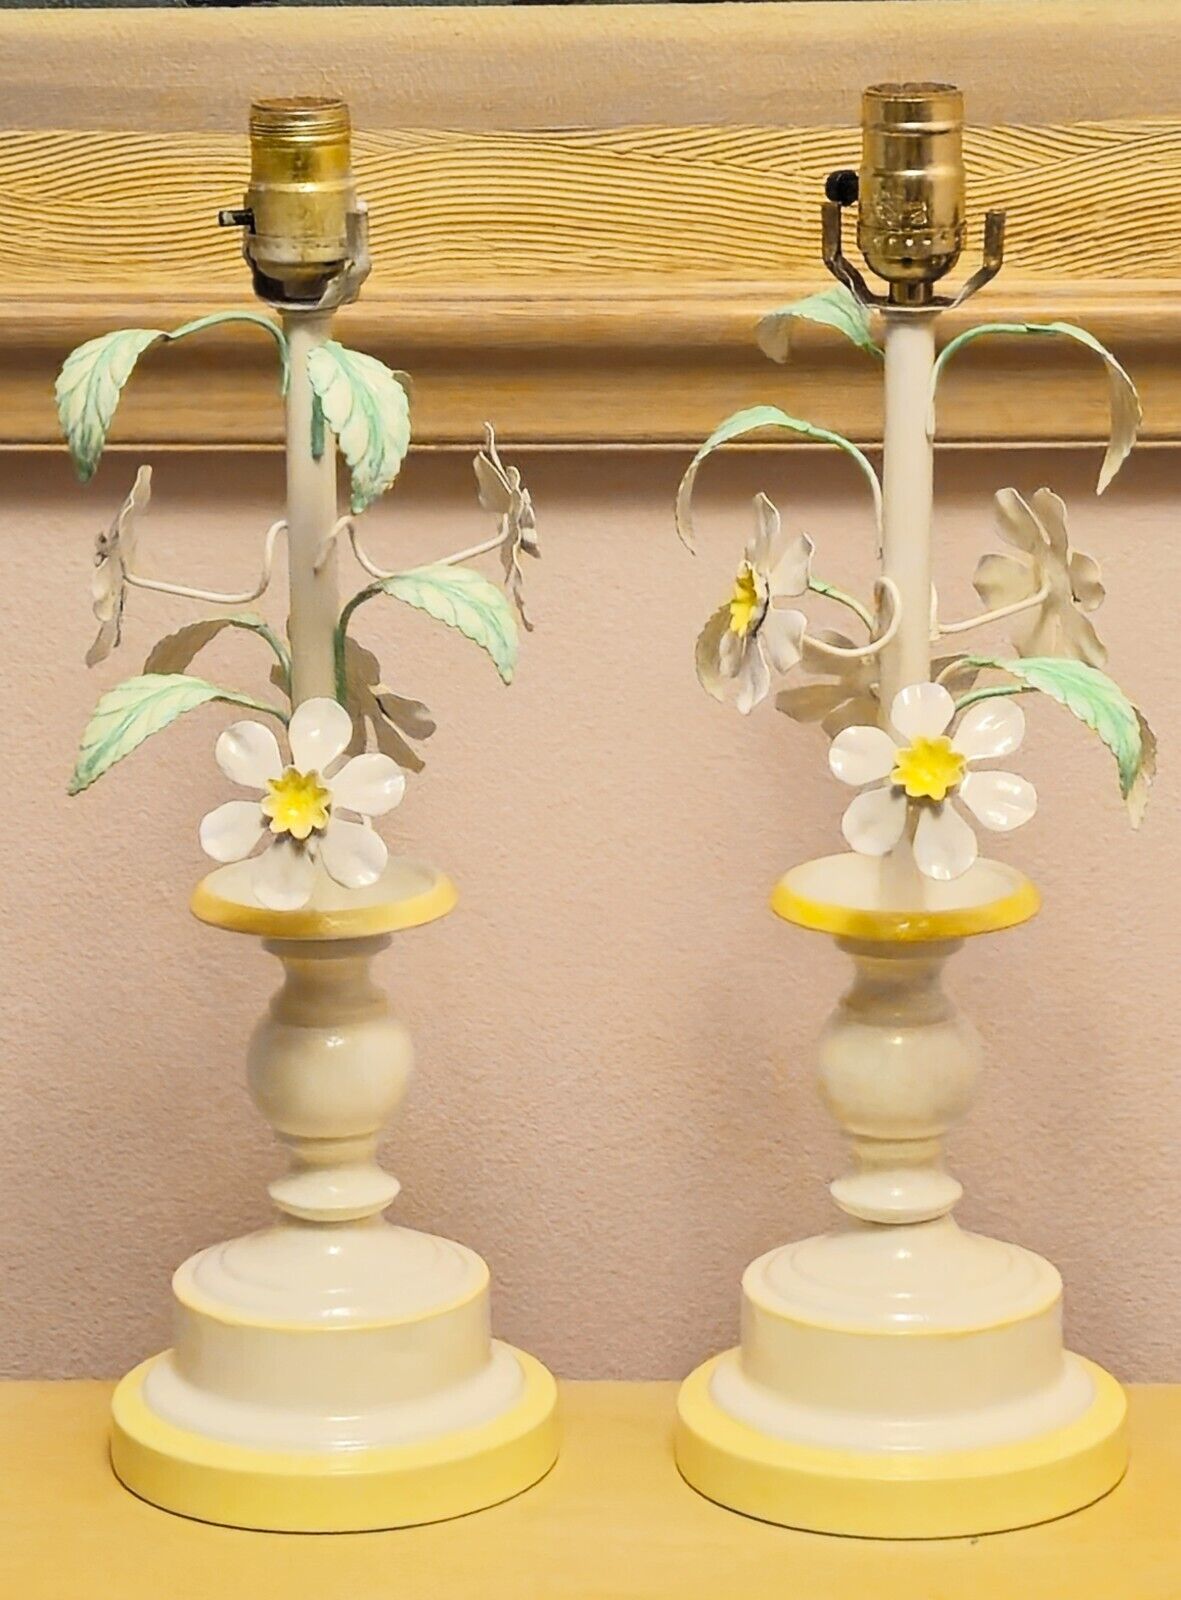 Two Vintage 1956 TOLE Metal & Wood Daisy Flowers Leaves Table Lamp Garden